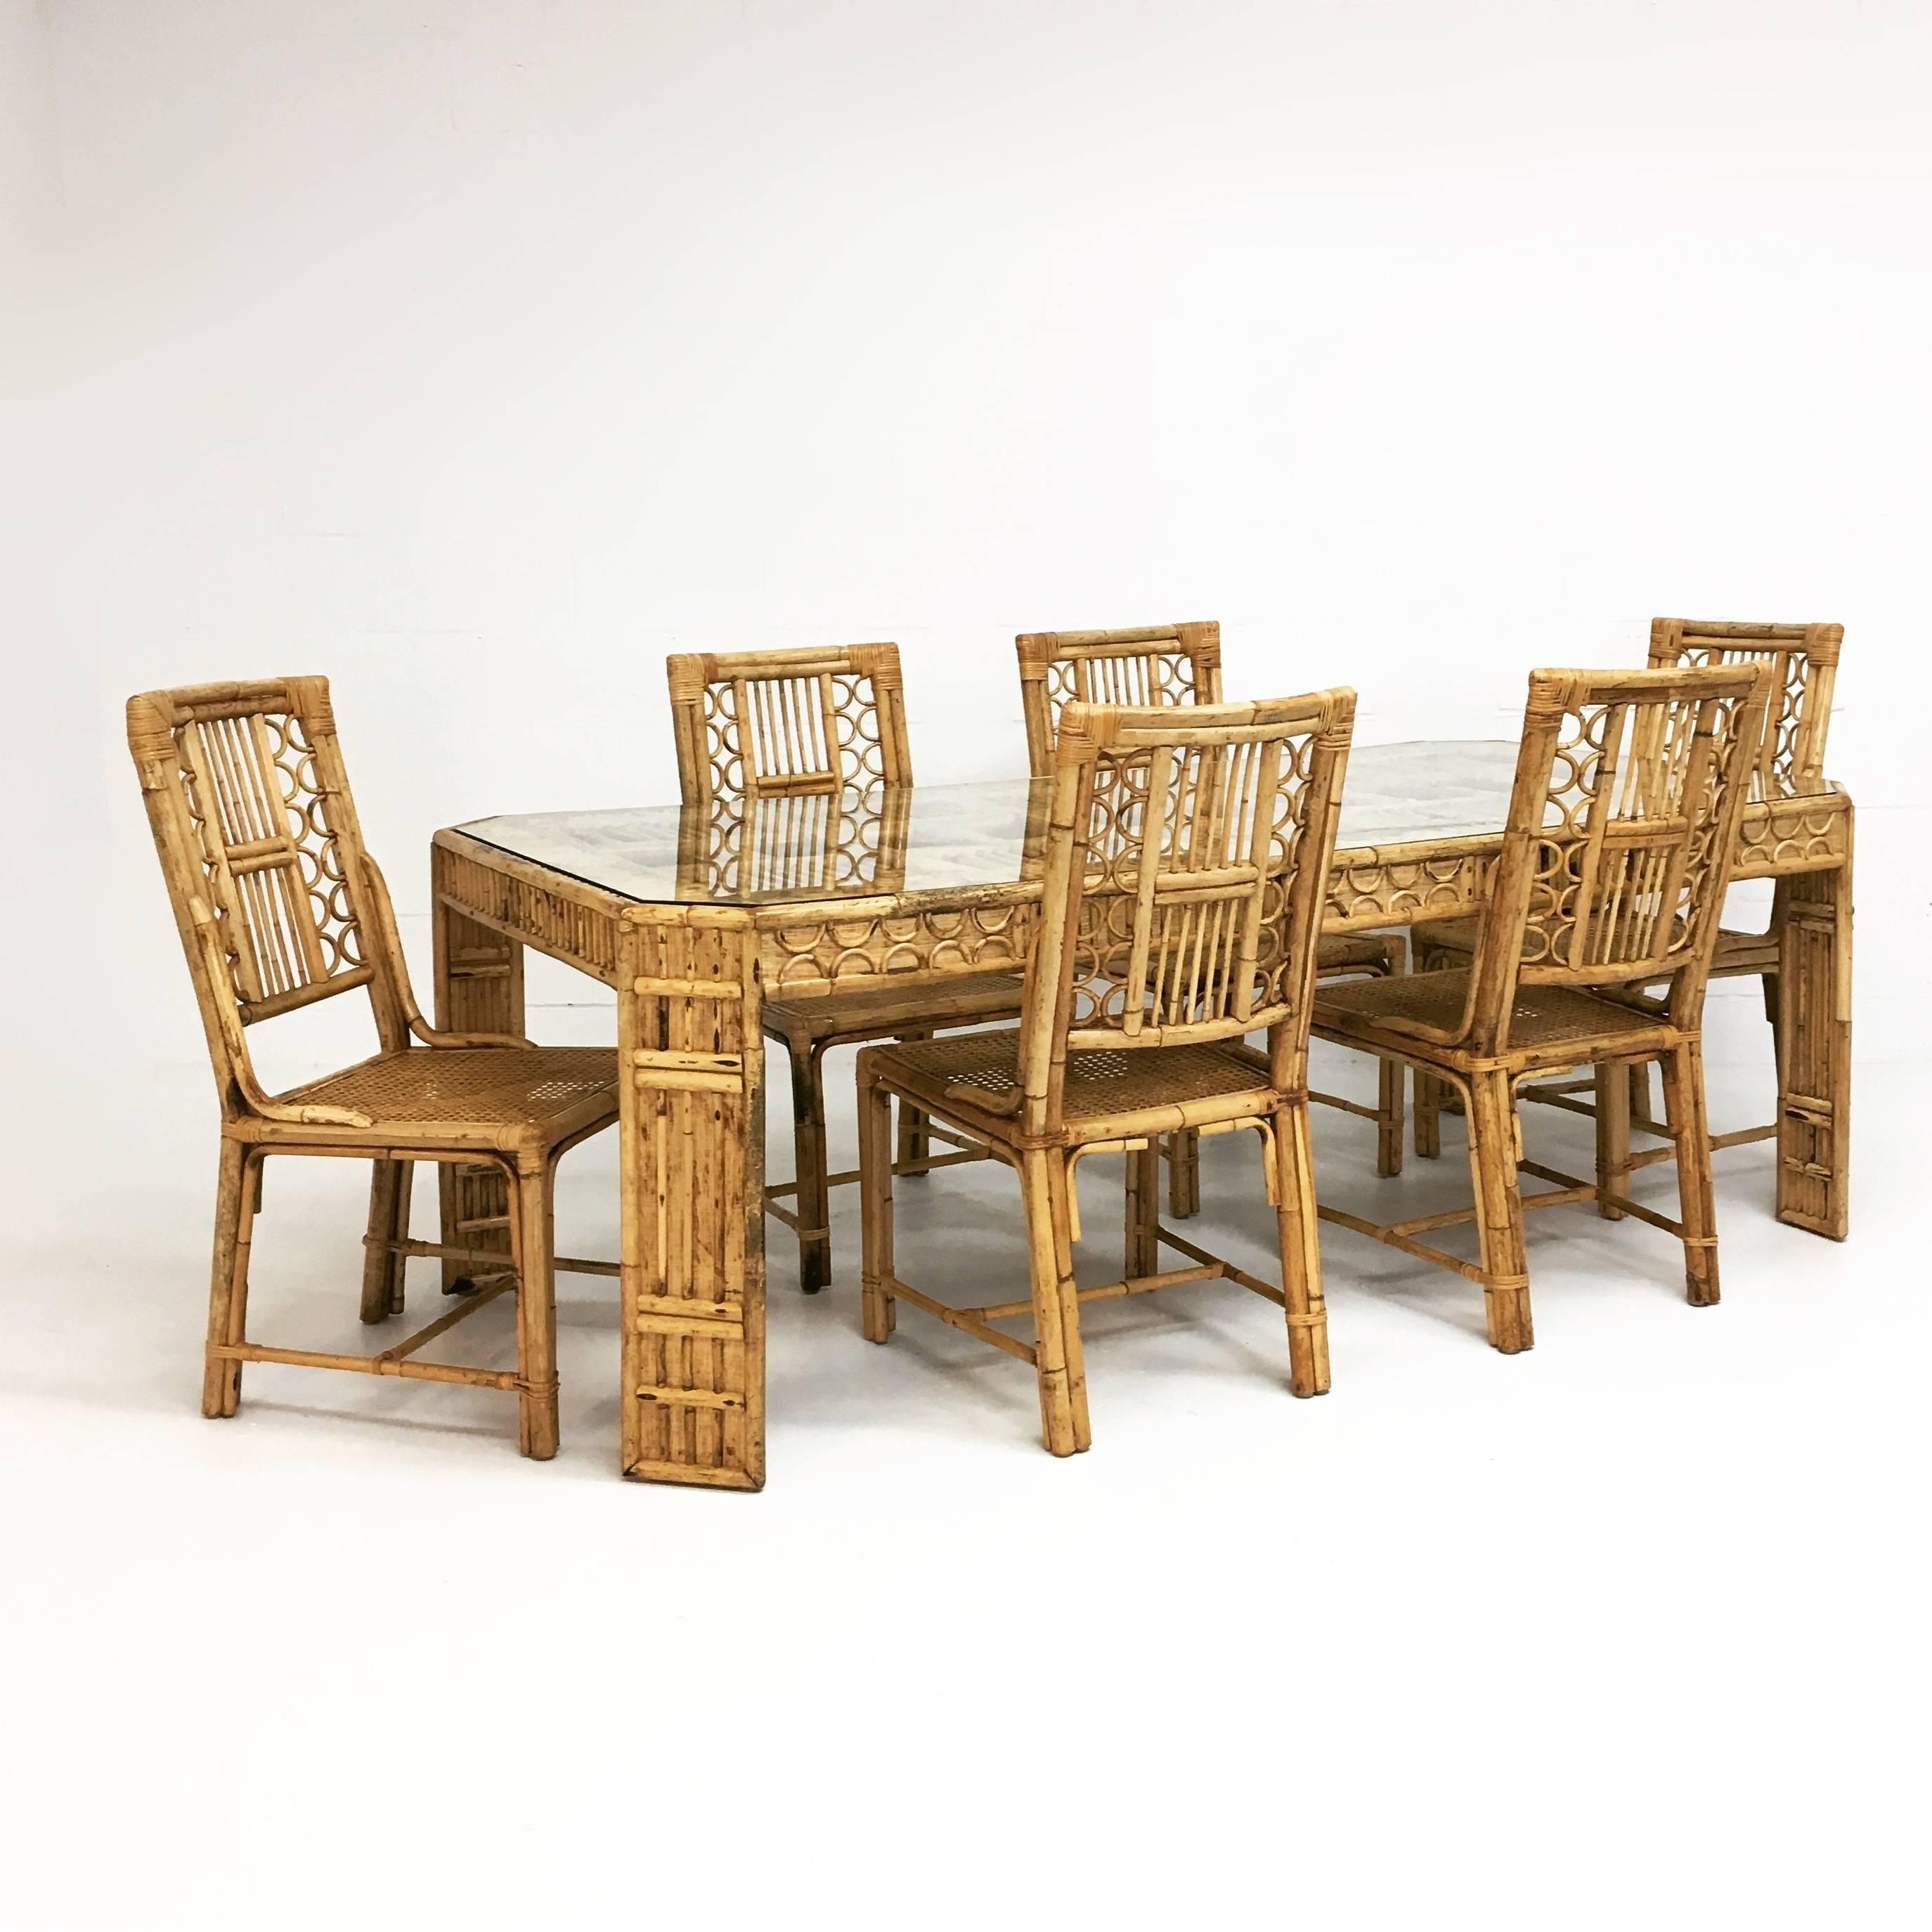 A rare Mid-Century glass topped rattan and bamboo dining table with six chairs. Age appropriate wear. All chairs will be delivered newly caned. 
Measures: Table 42 D x 84 W x 29 H.
Chairs: 23 D x 20 W x 38 H, seat 17" H.